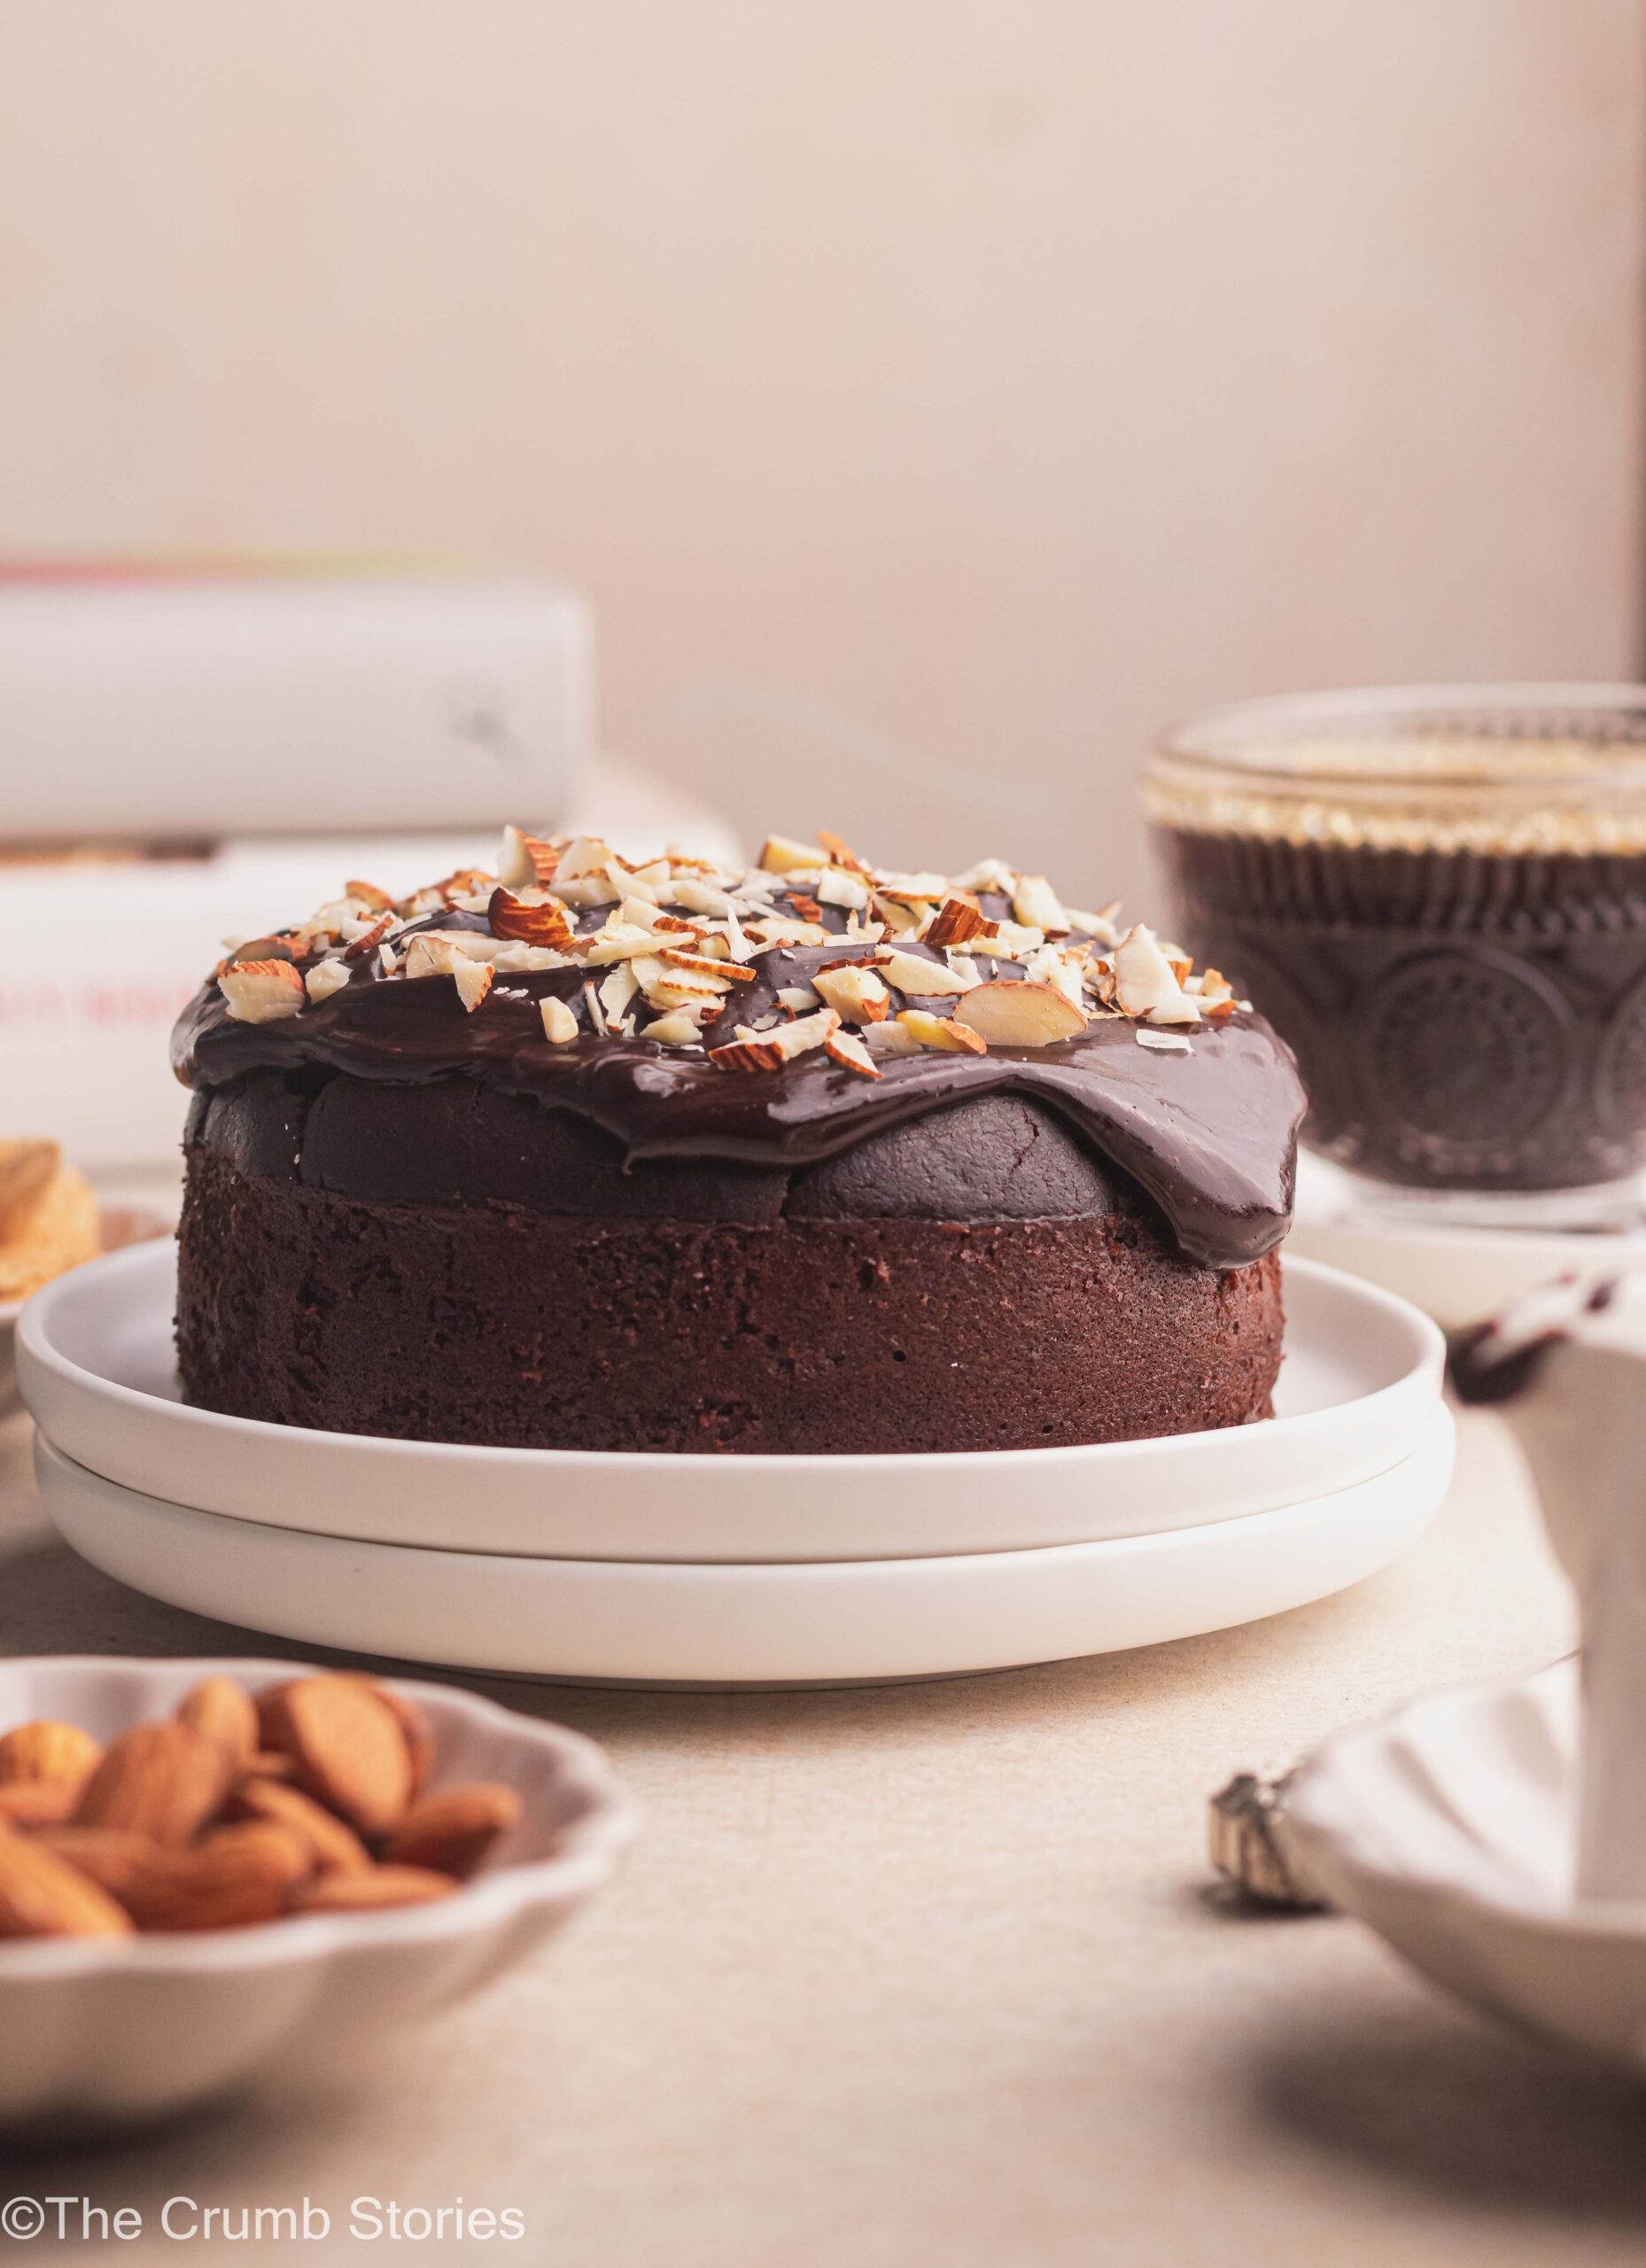 Grain-Free Chocolate Almond Cake {Adapted from Paul Hollywood's Version}